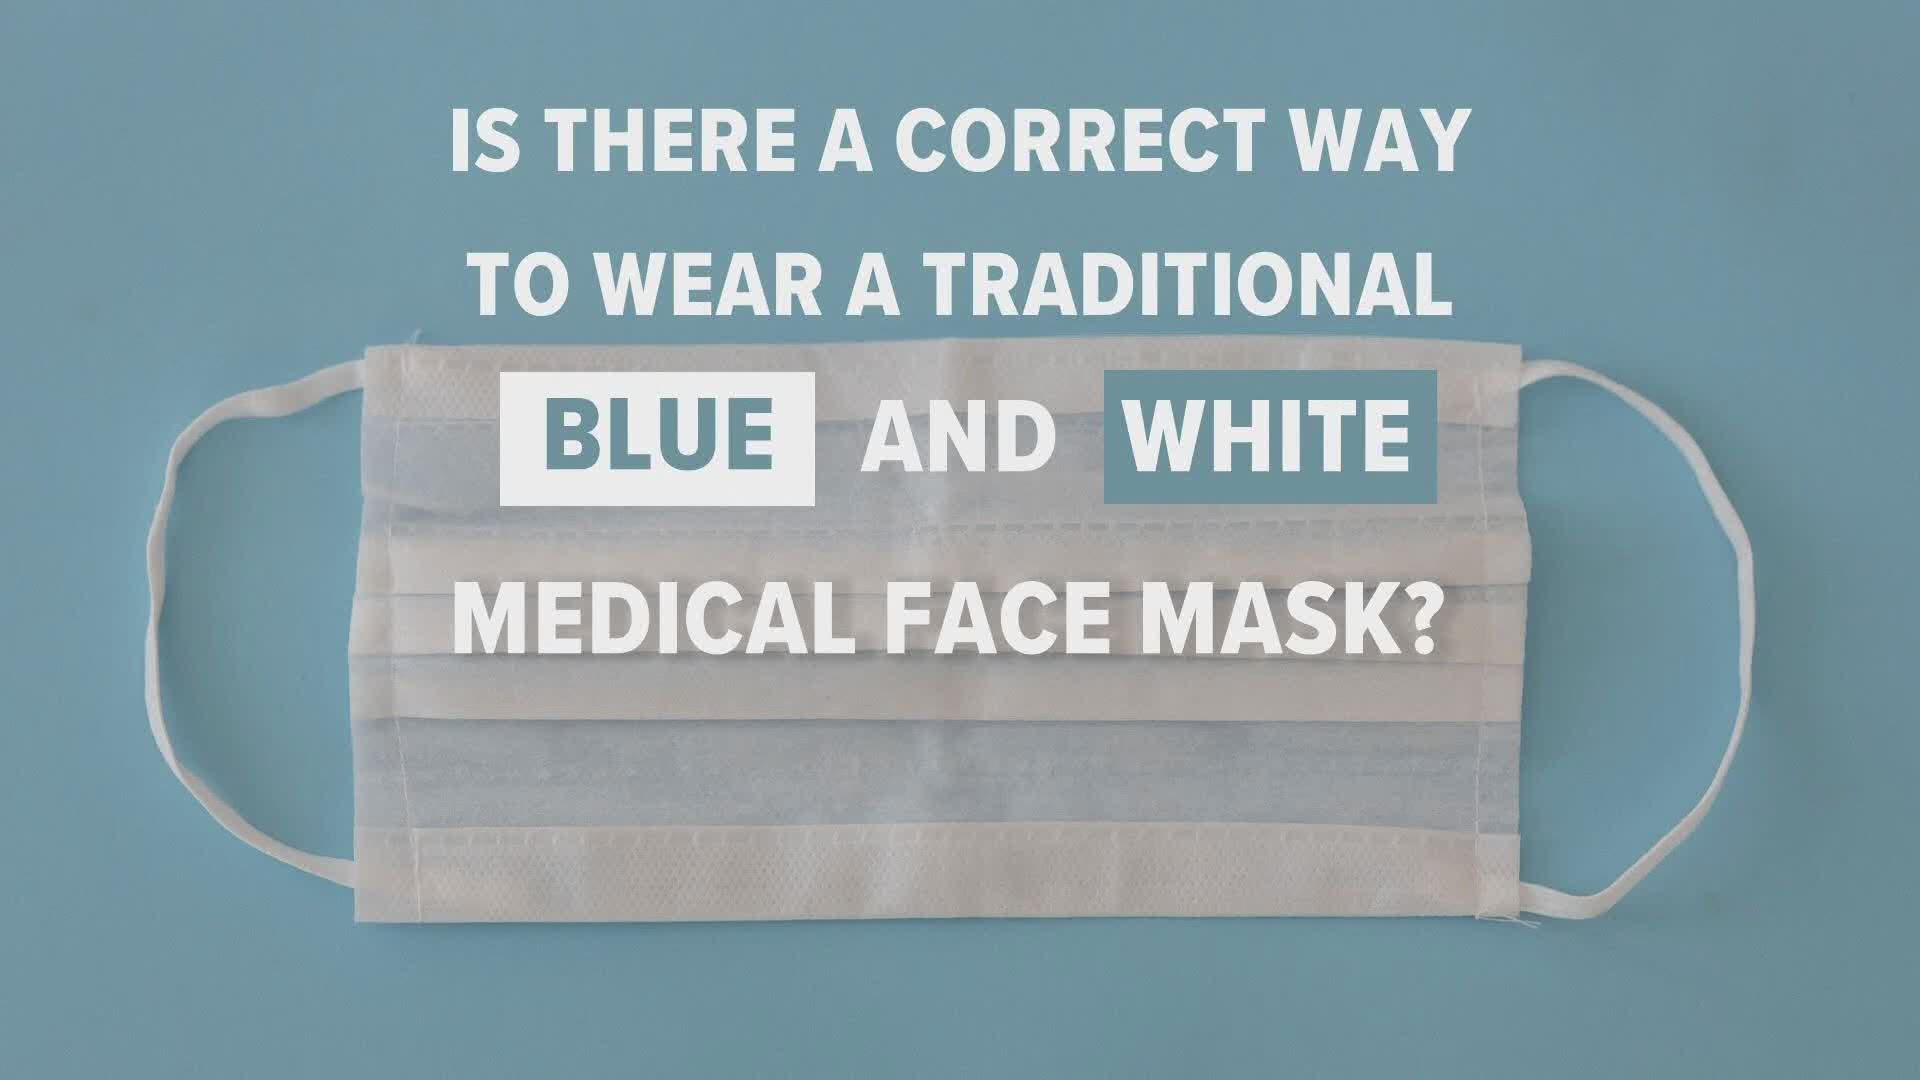 13 ON YOUR SIDE verifies some common mask myths and most frequently asked questions.